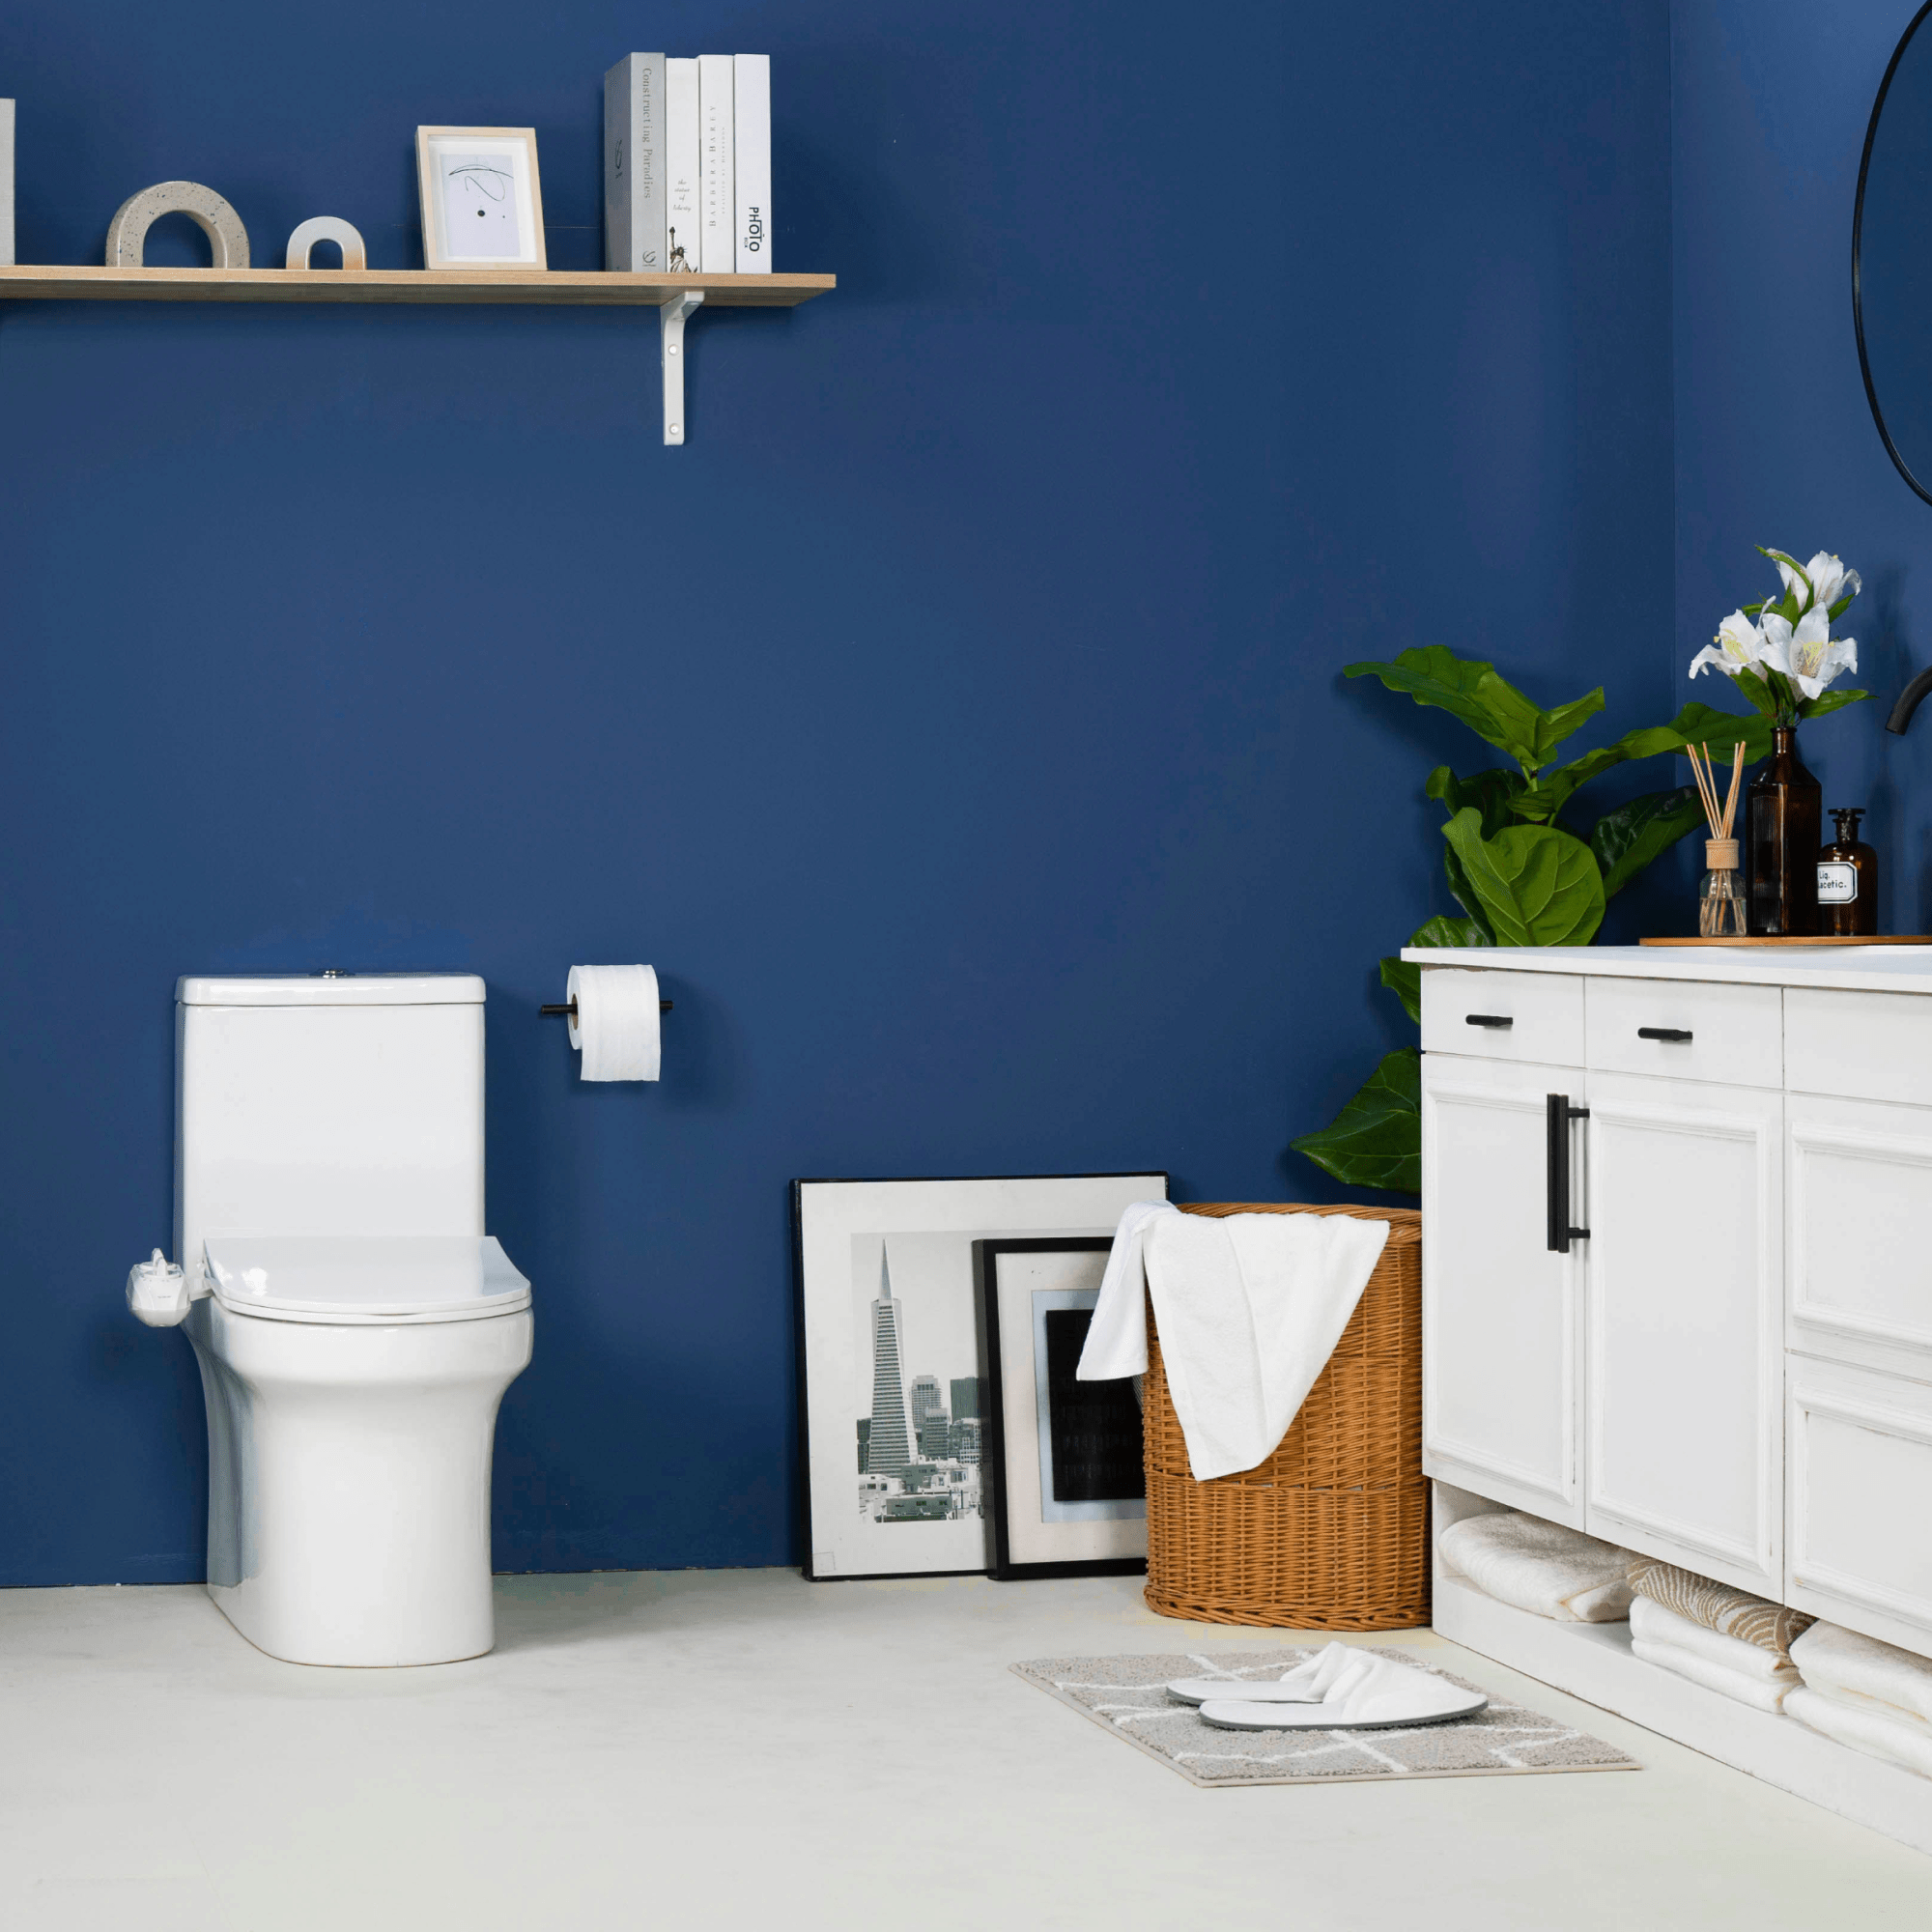 NEO 120 Plus White installed on a toilet, in a modern blue bathroom with a plant, painting, and basket of towels